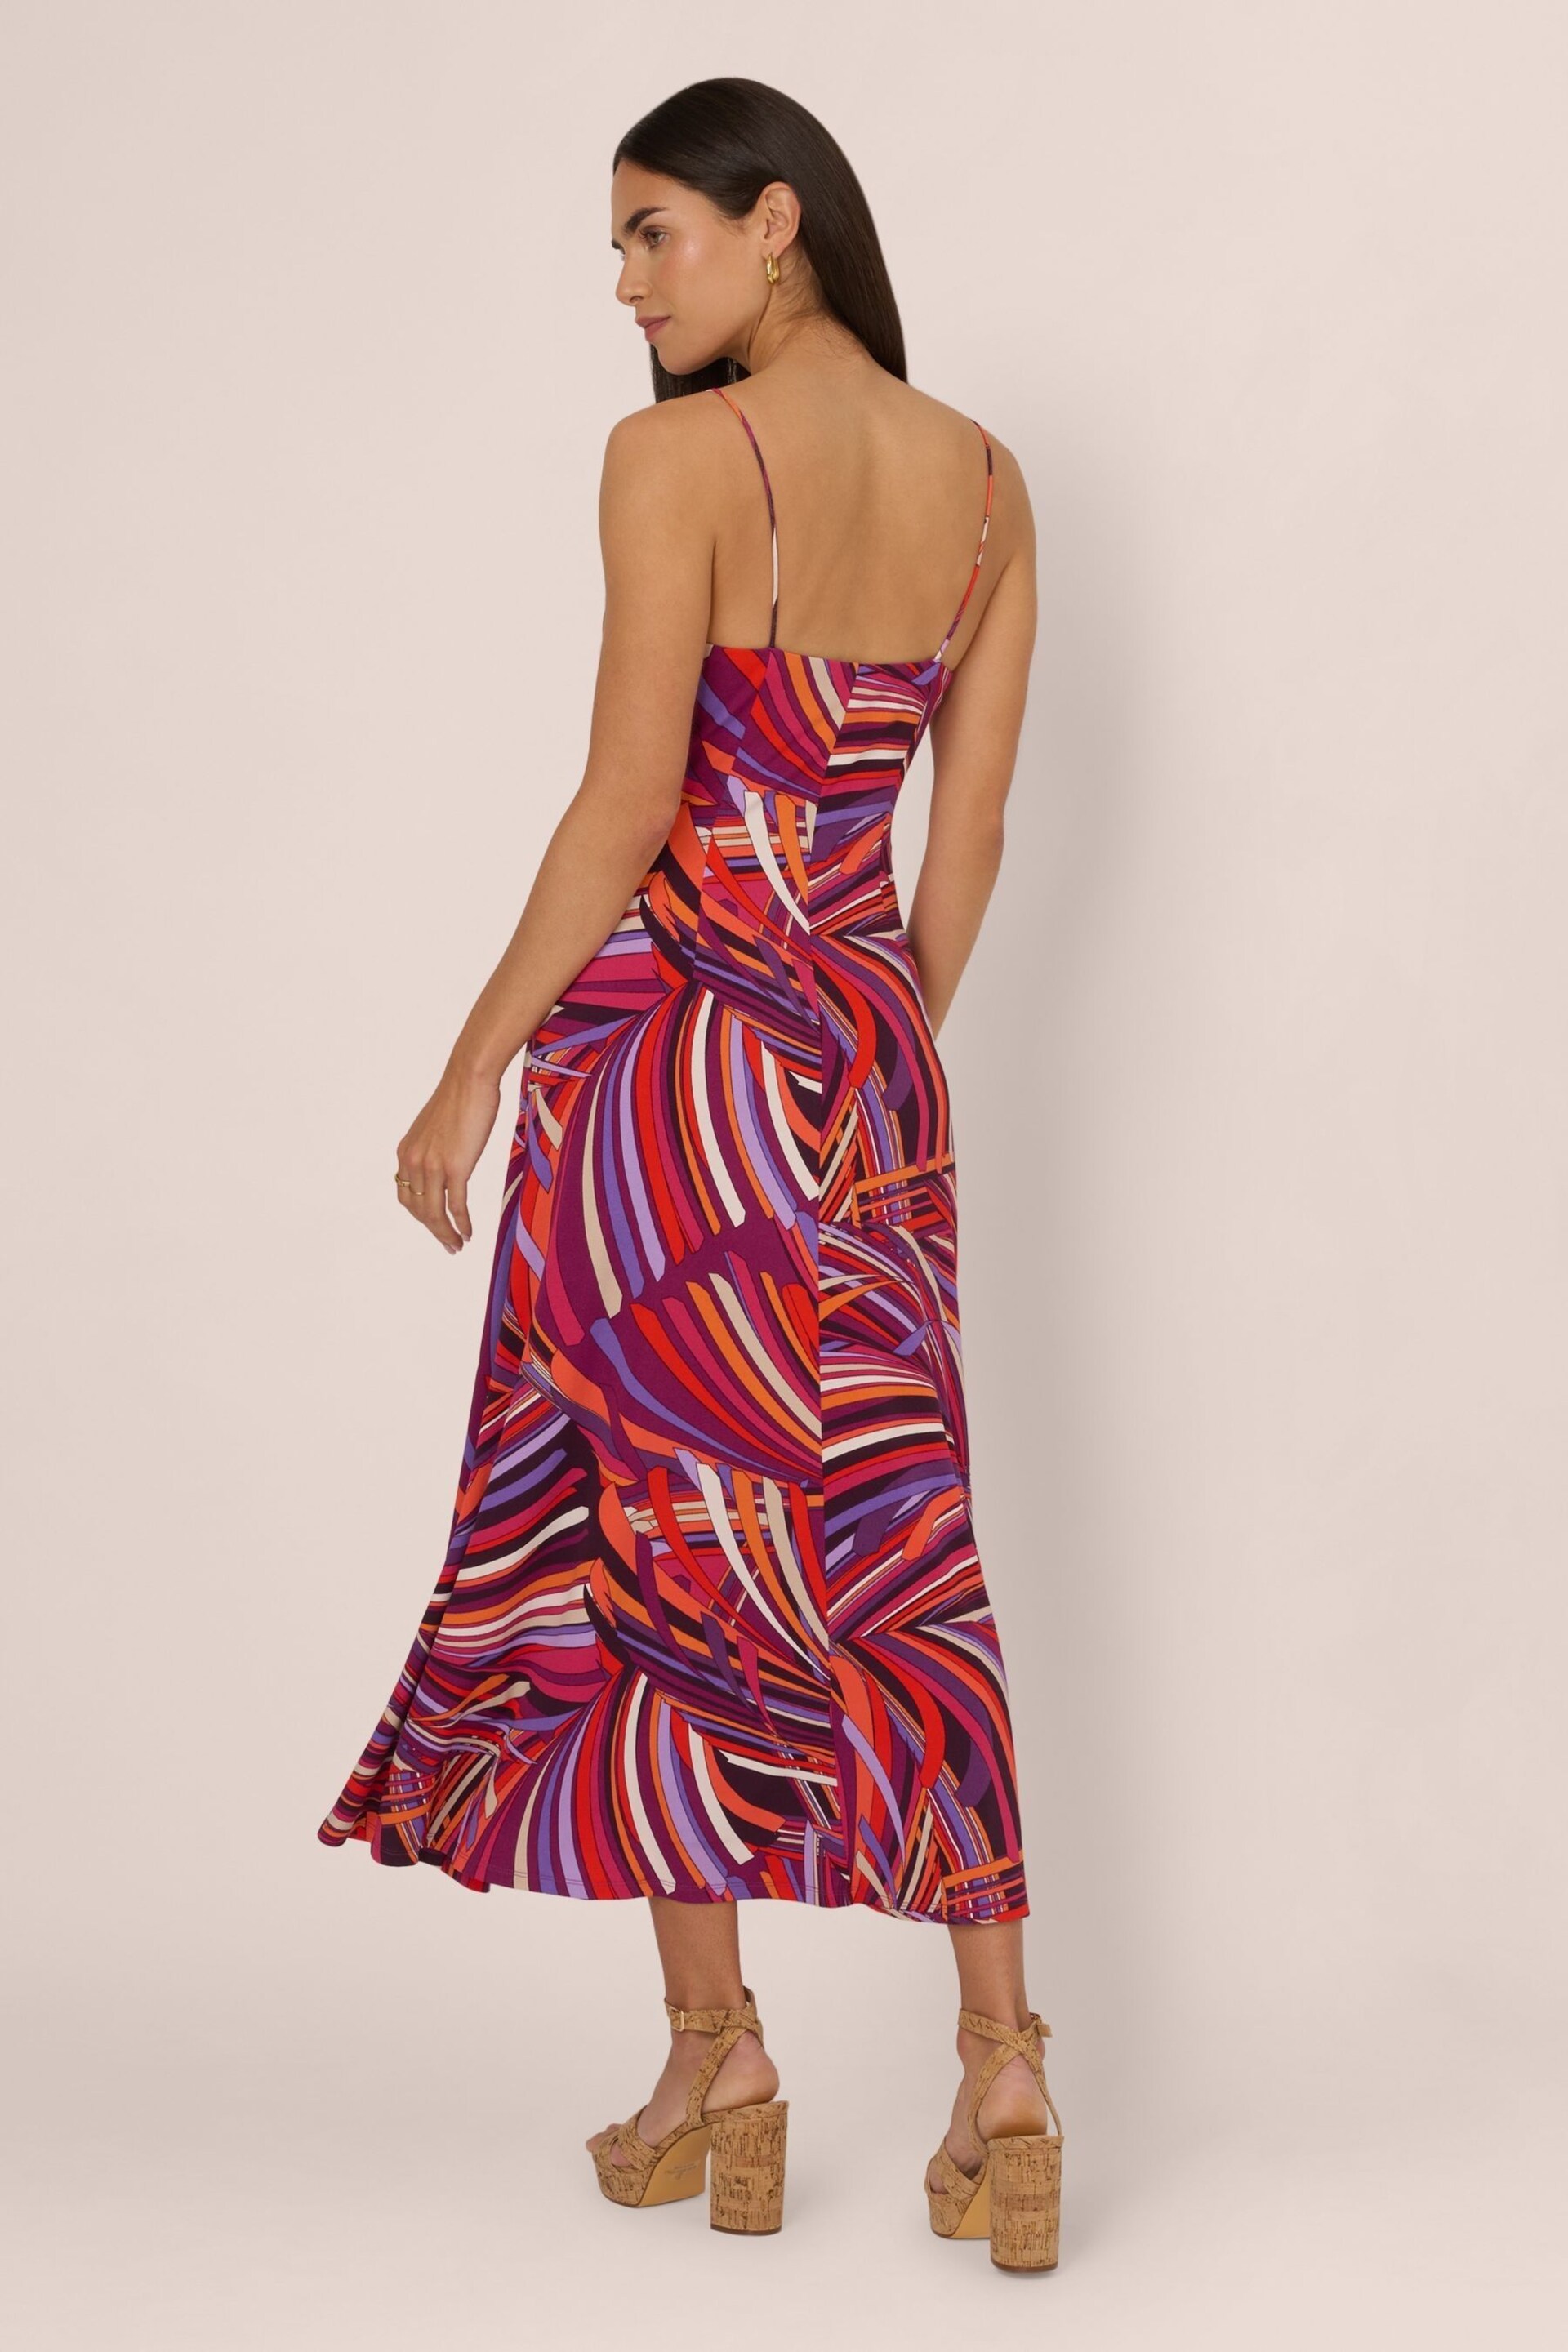 Adrianna Papell Purple Printed Jersey Dress - Image 2 of 7